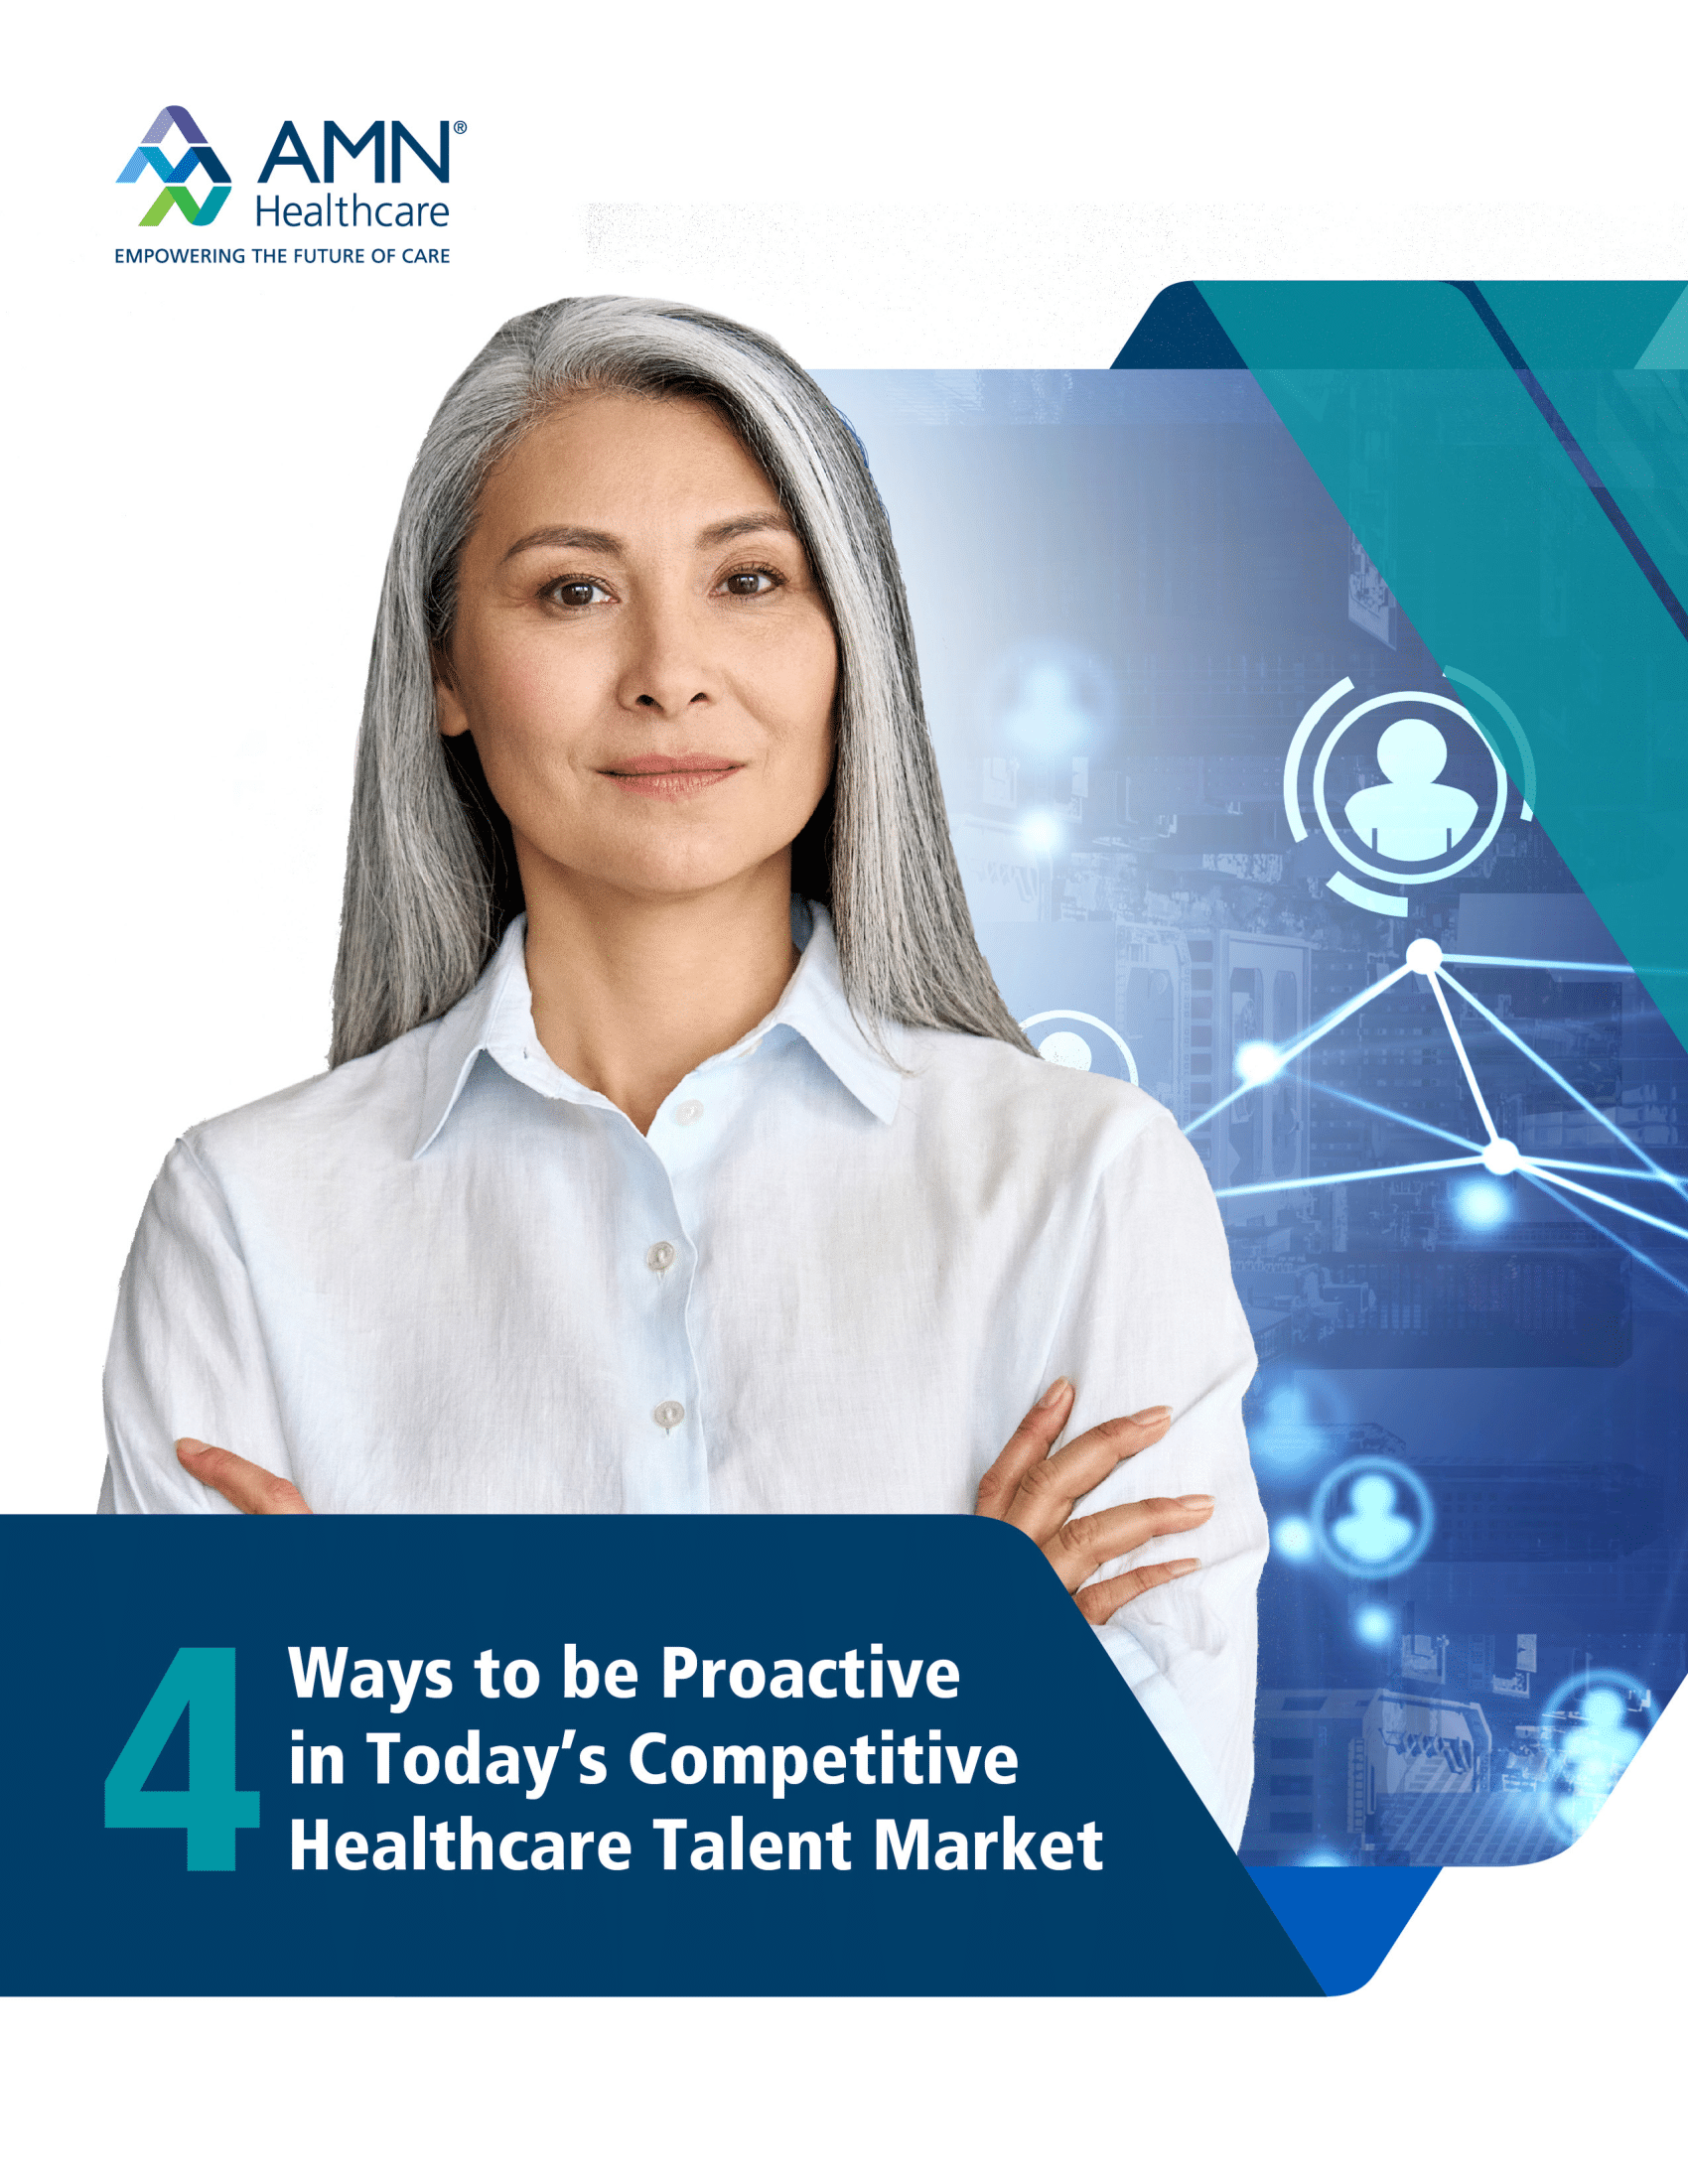 4 Ways to be Proactive in Today’s Competitive Healthcare Talent Market